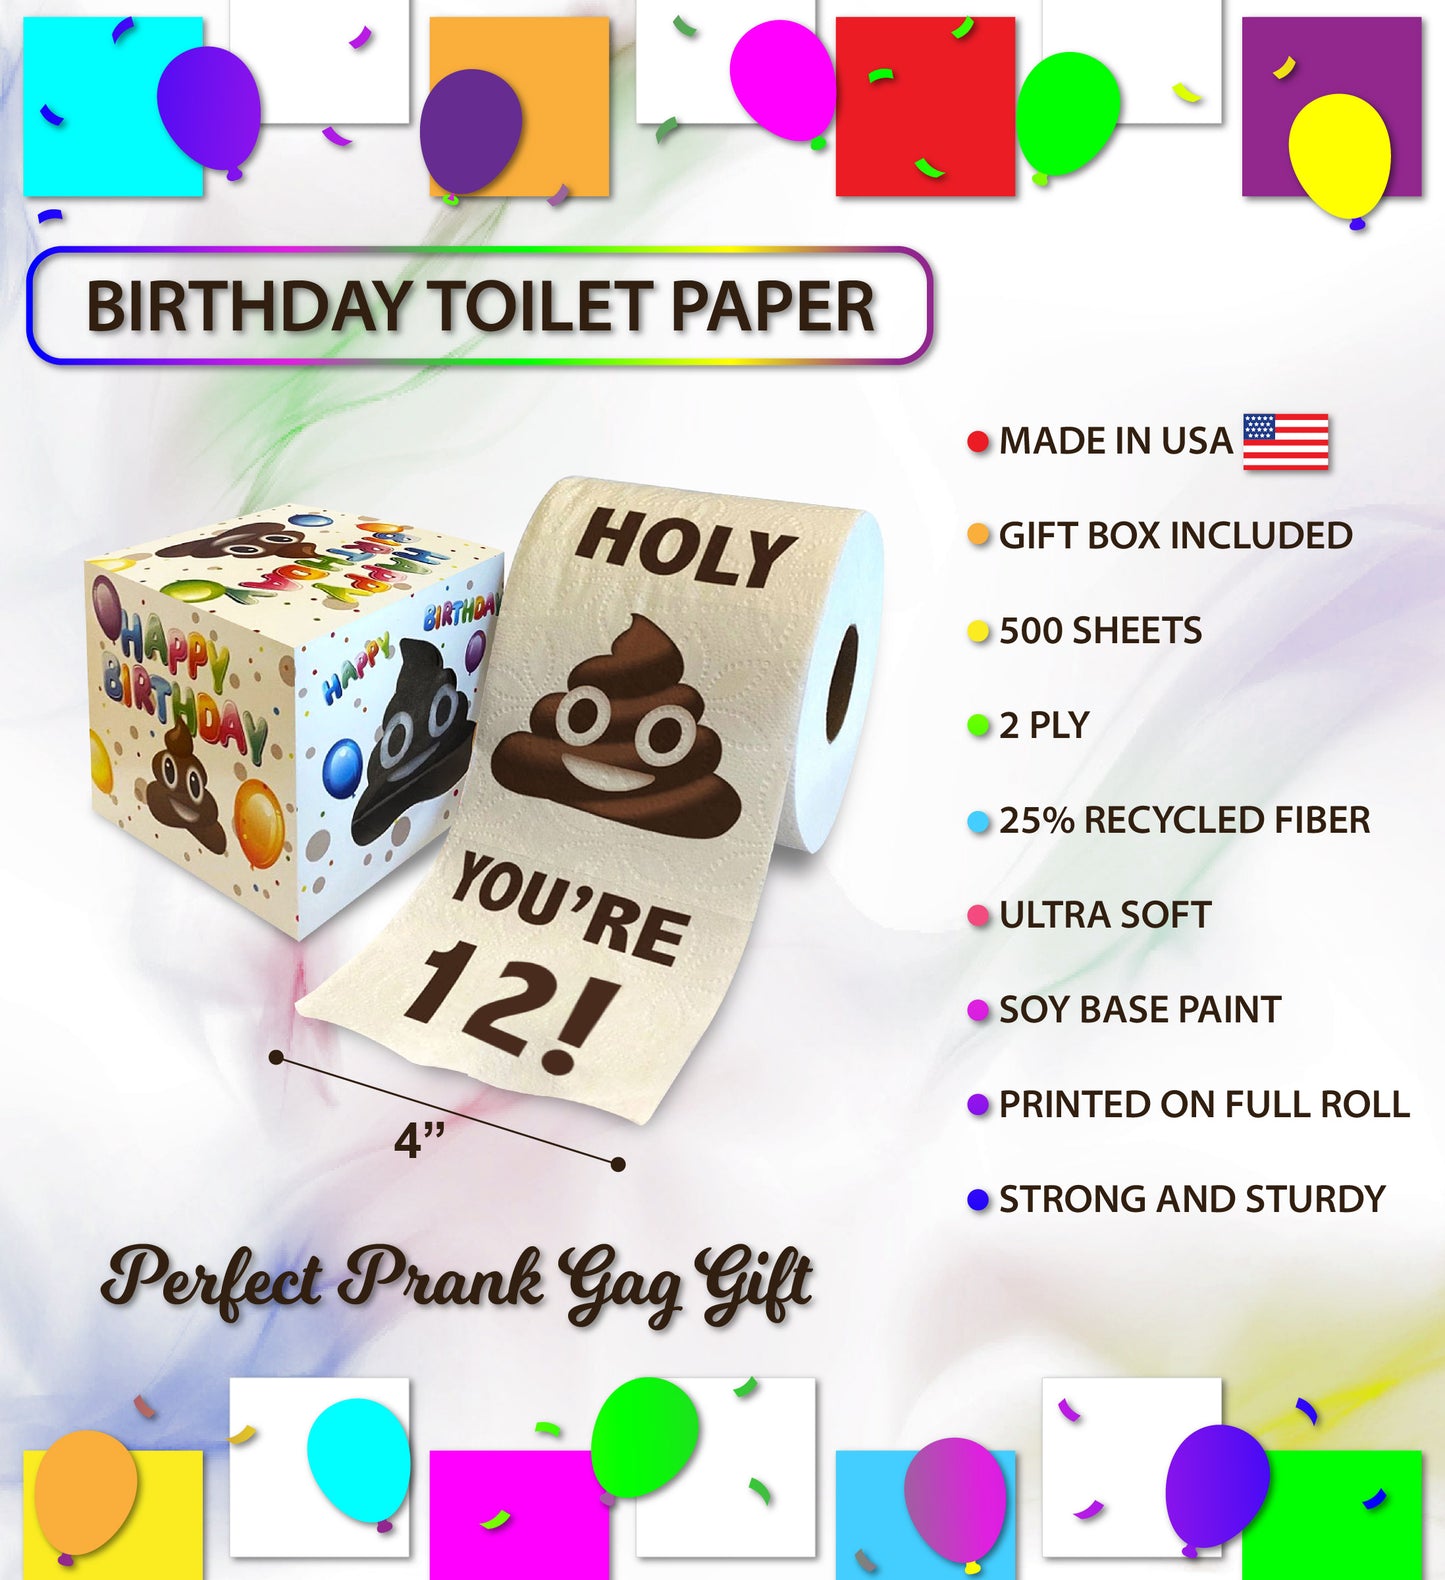 Printed TP Holy Poop You're 12 Printed Toilet Paper Gag Gift – Happy 12th Birthday Funny Toilet Paper For Surprise, Decor, Bday Fun Gift - 500 Sheets